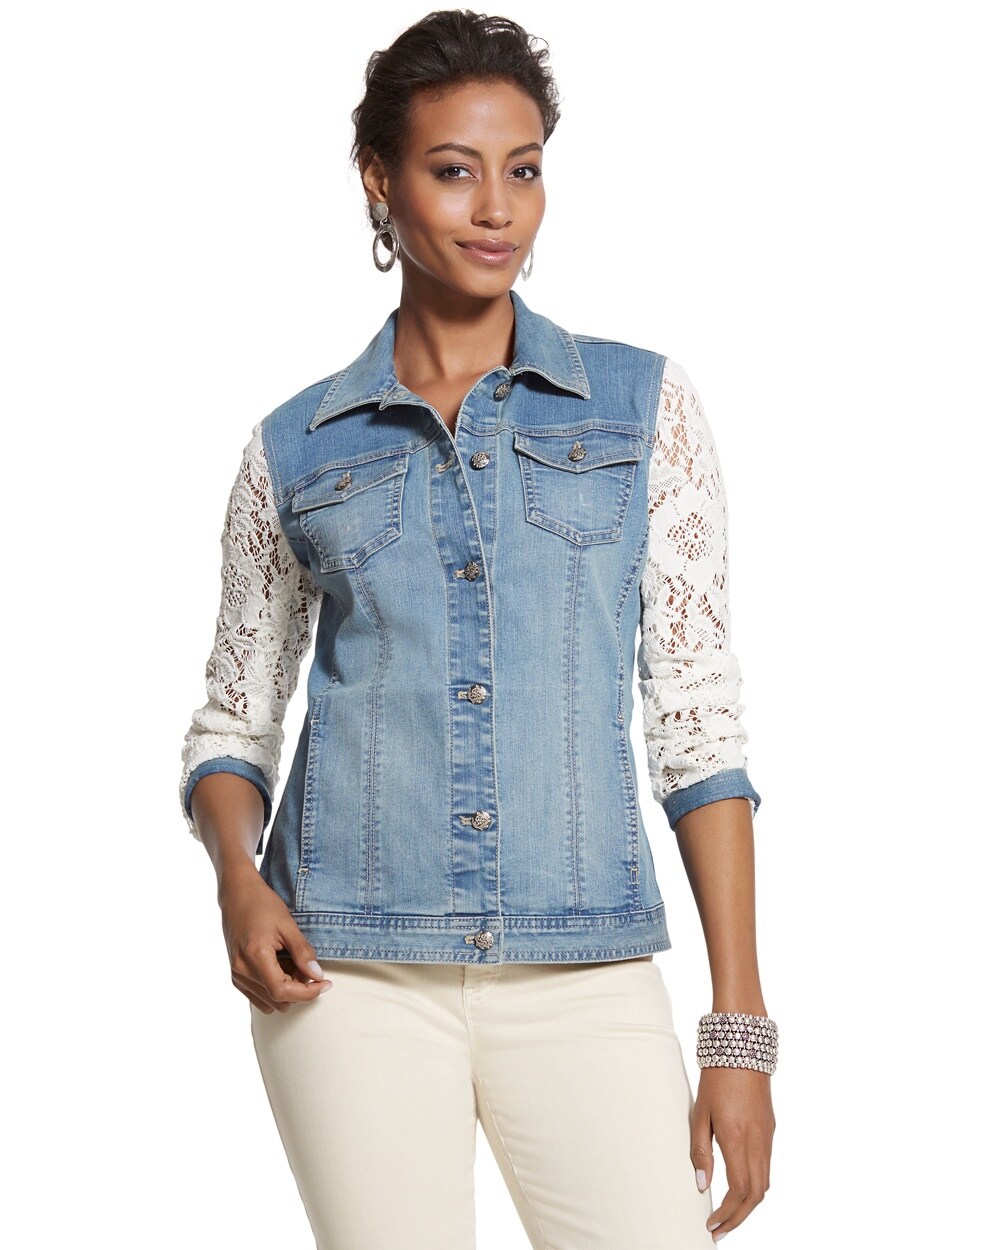 Denim and Lace Jacket